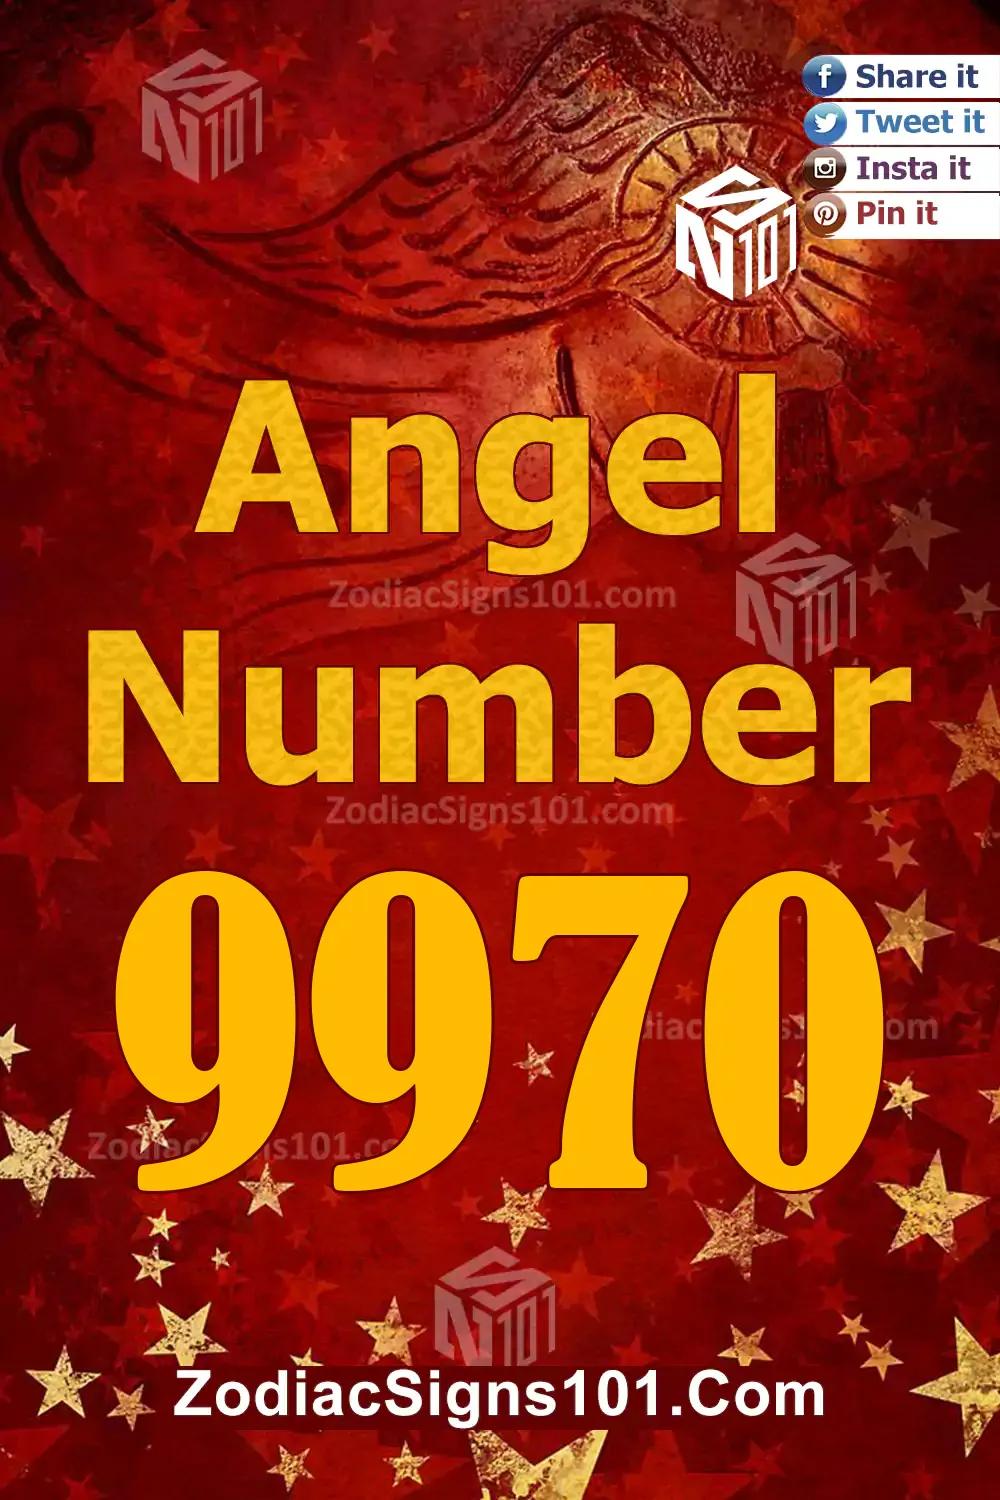 9970 Angel Number Meaning